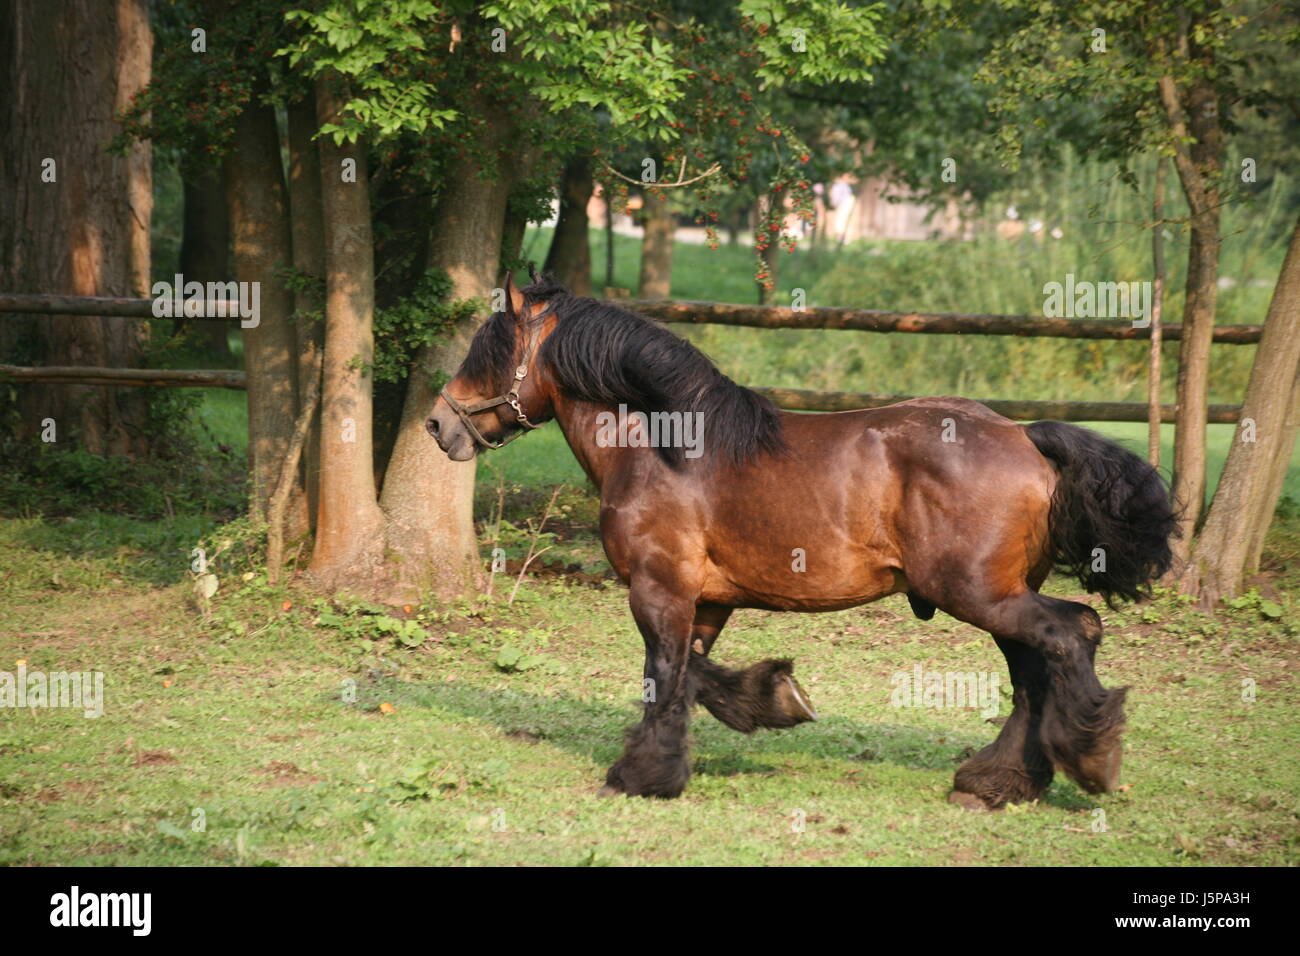 horse animal brown brownish brunette strong agriculture farming horses halter Stock Photo